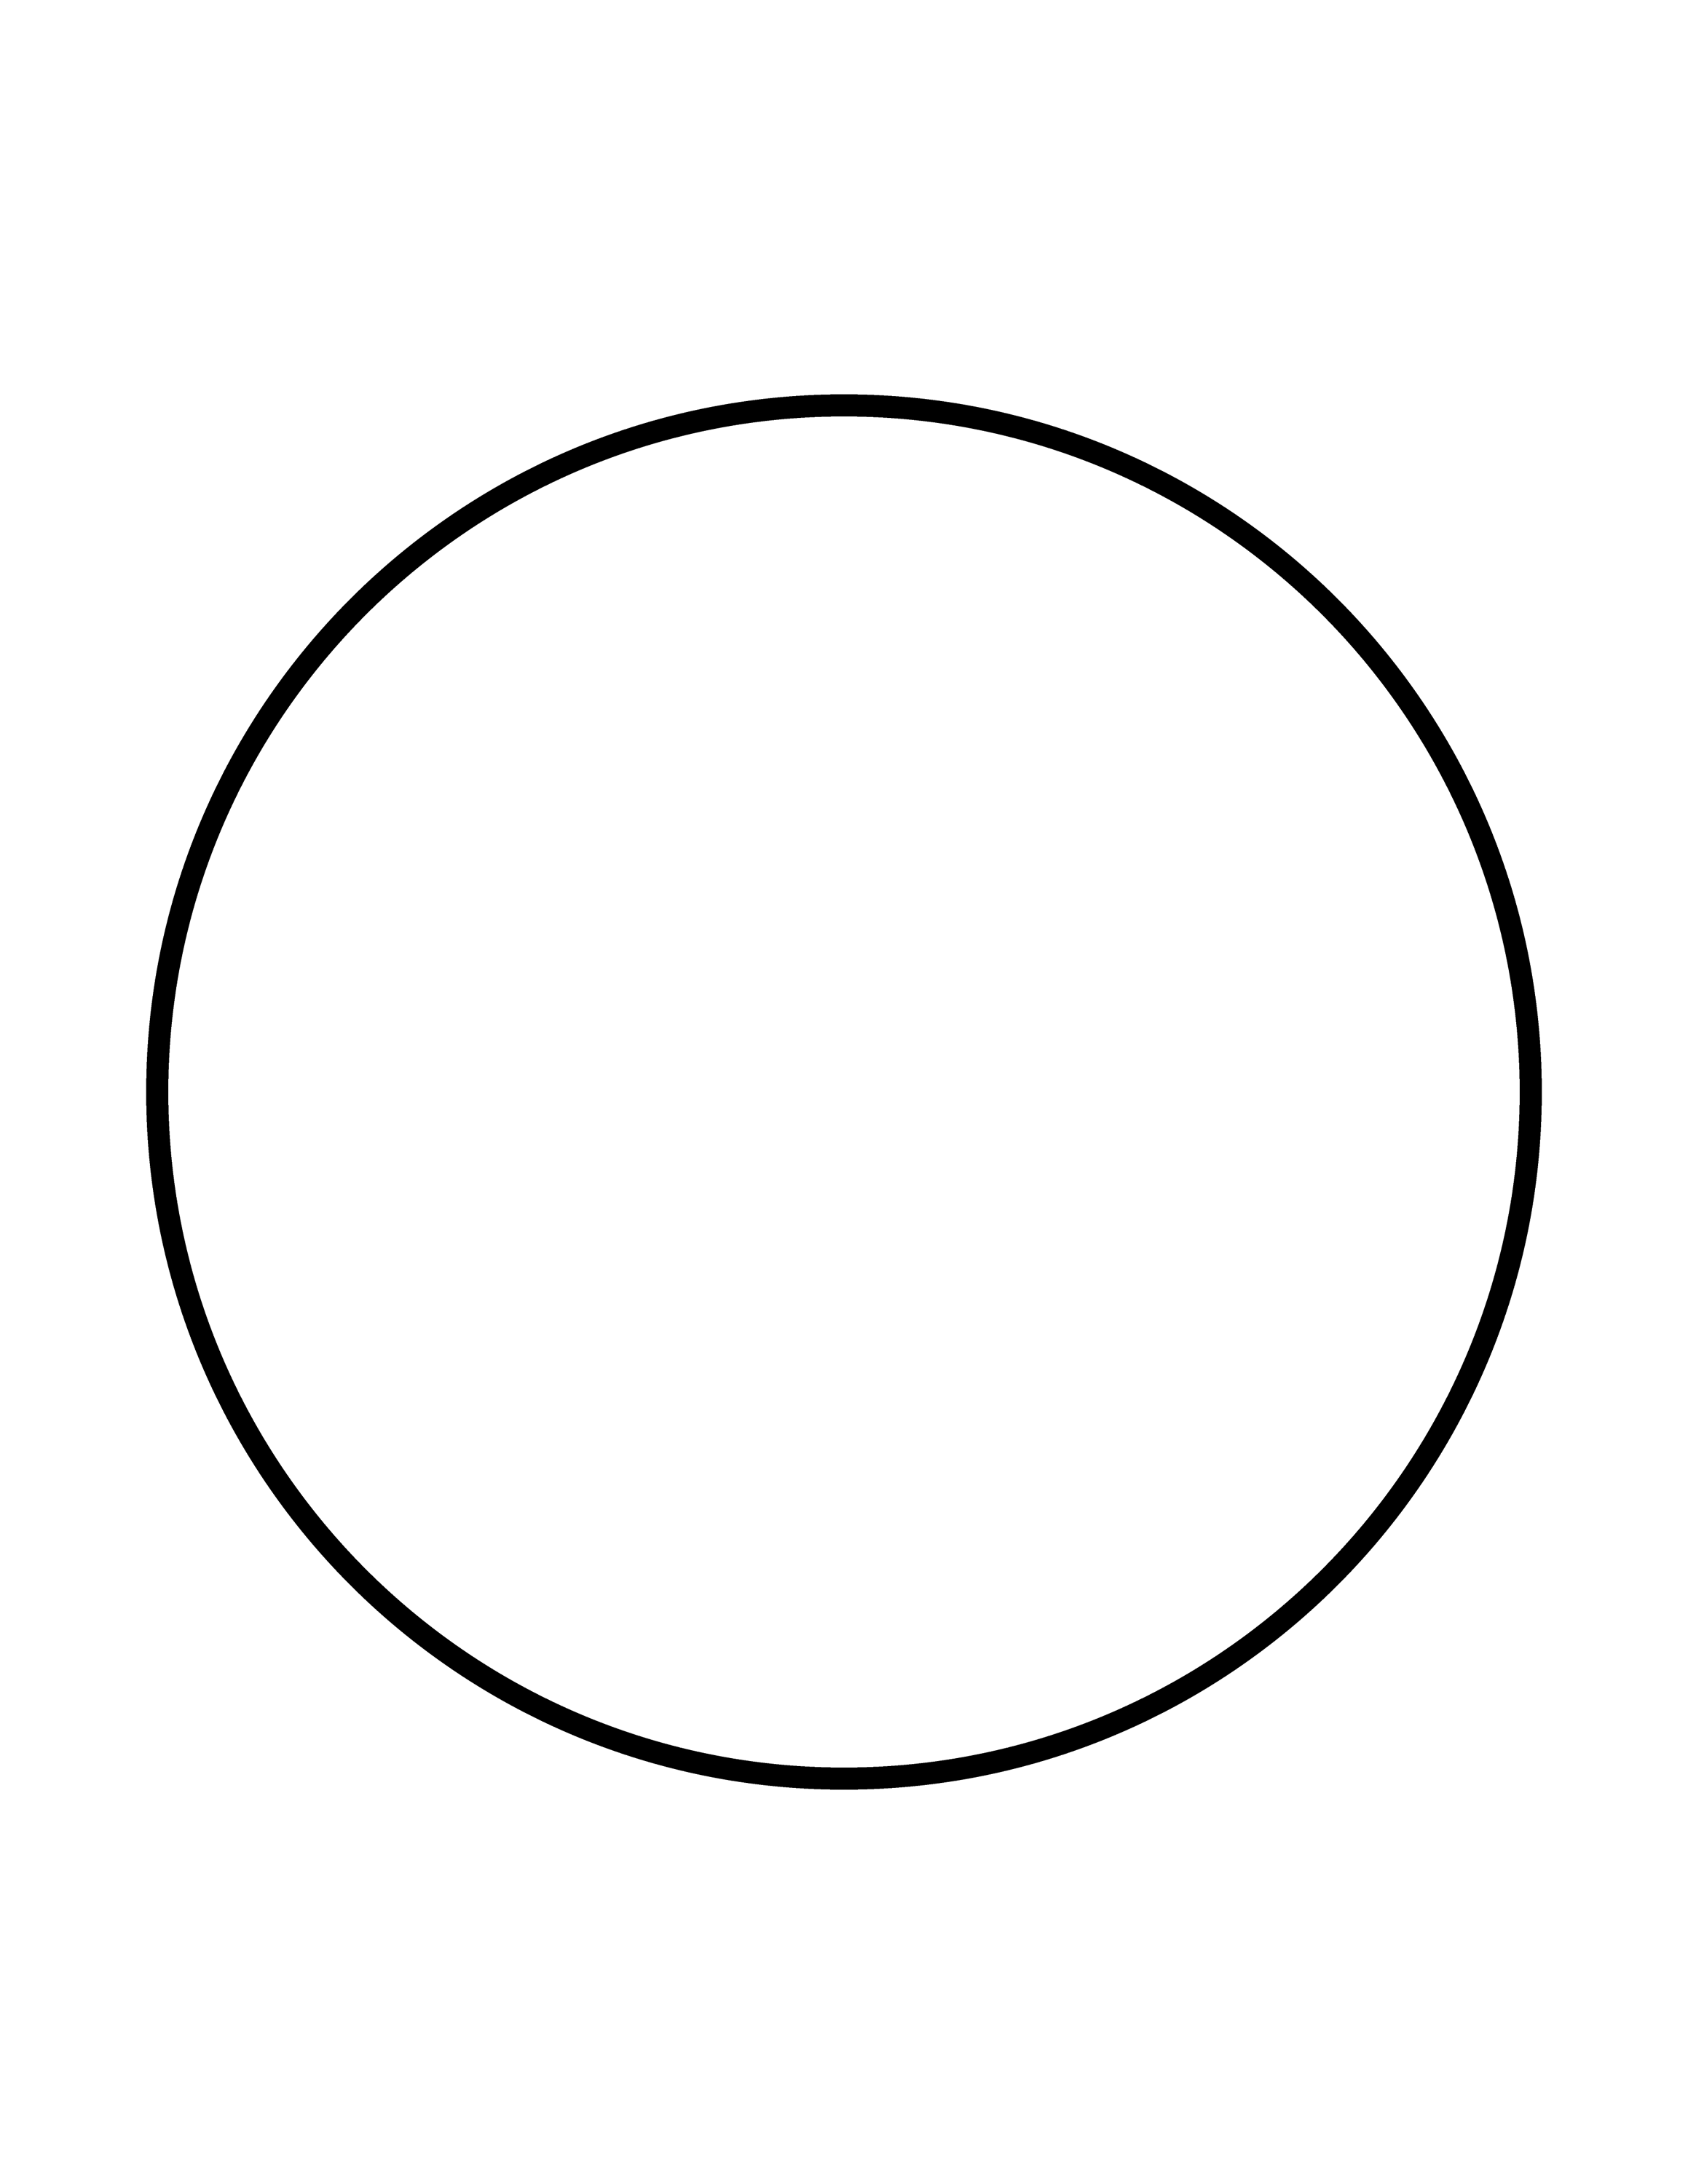 clipart picture of a circle - photo #36